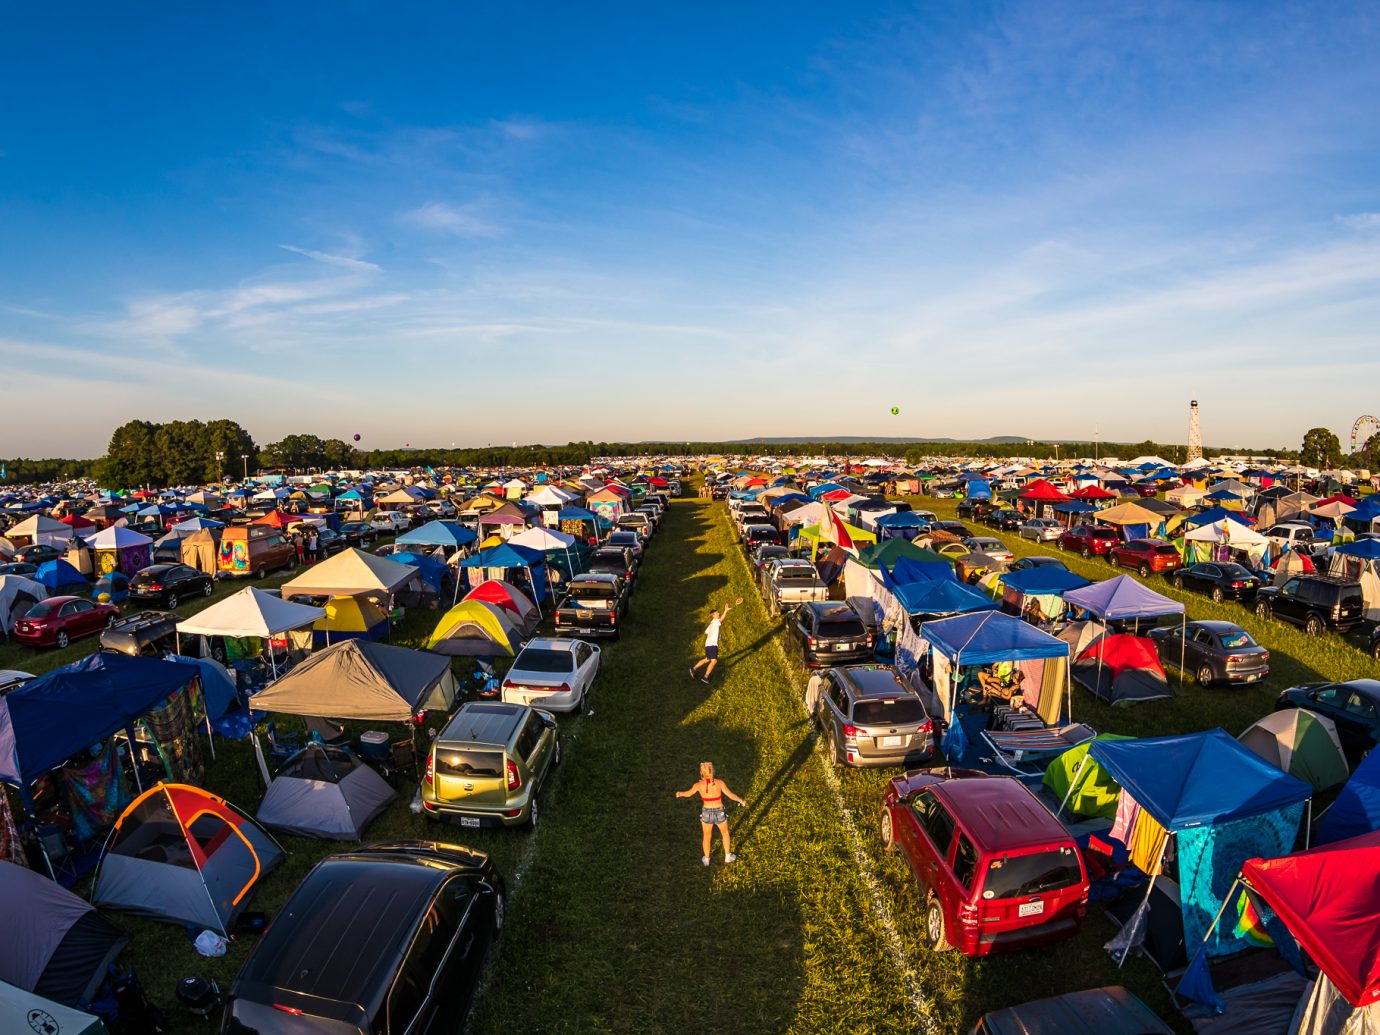 overhead shot of people playing games between a line of cars and tents